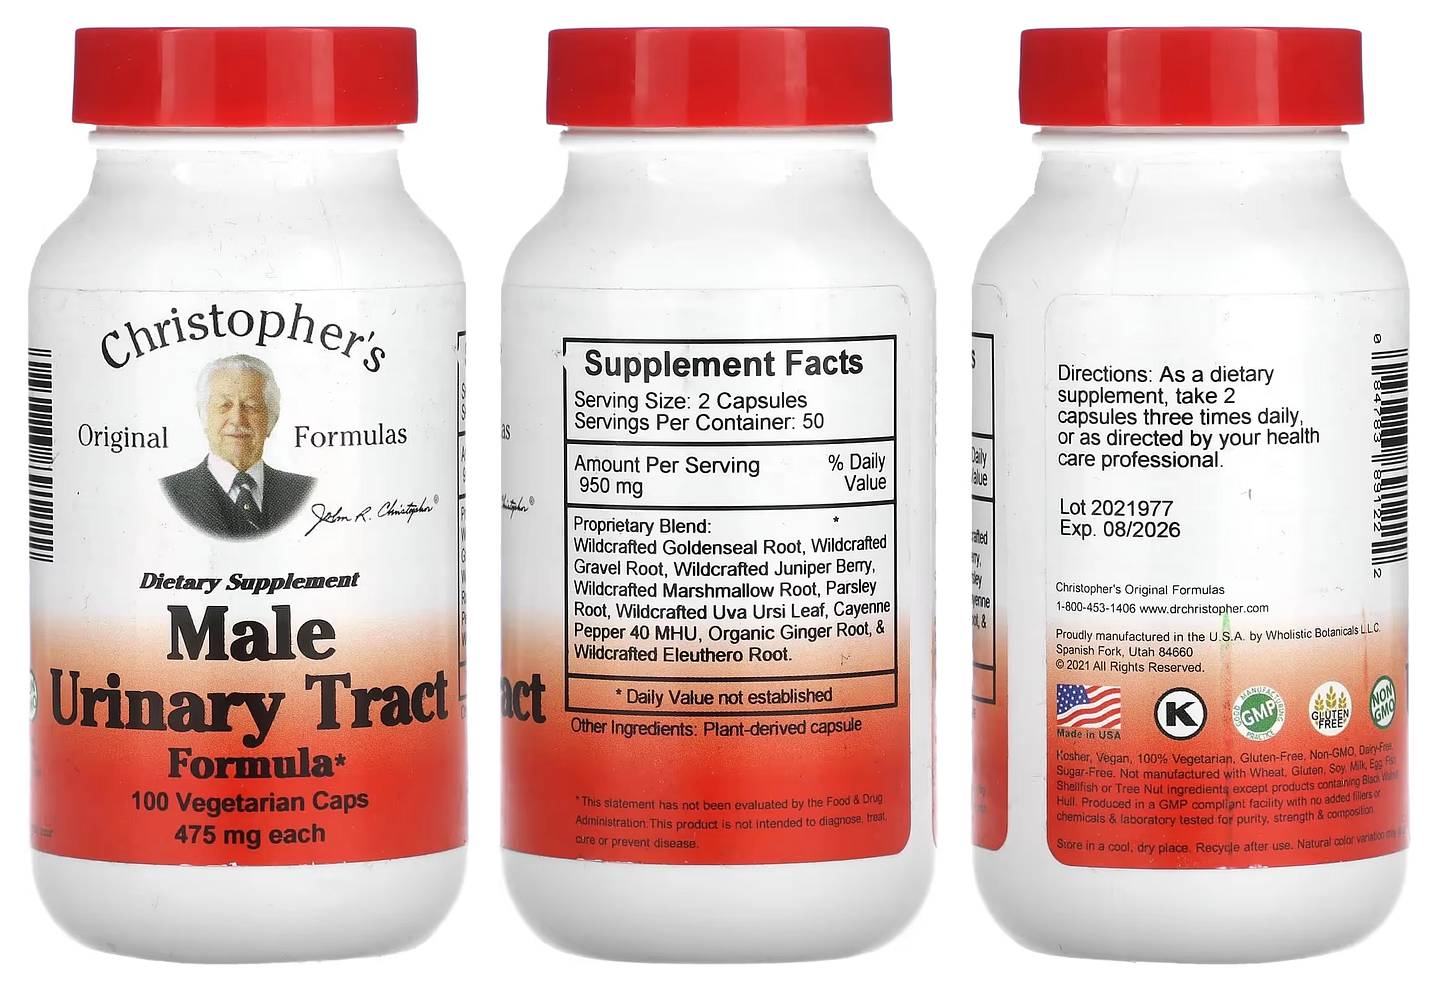 Dr. Christopher's, Male Urinary Tract Formula packaging